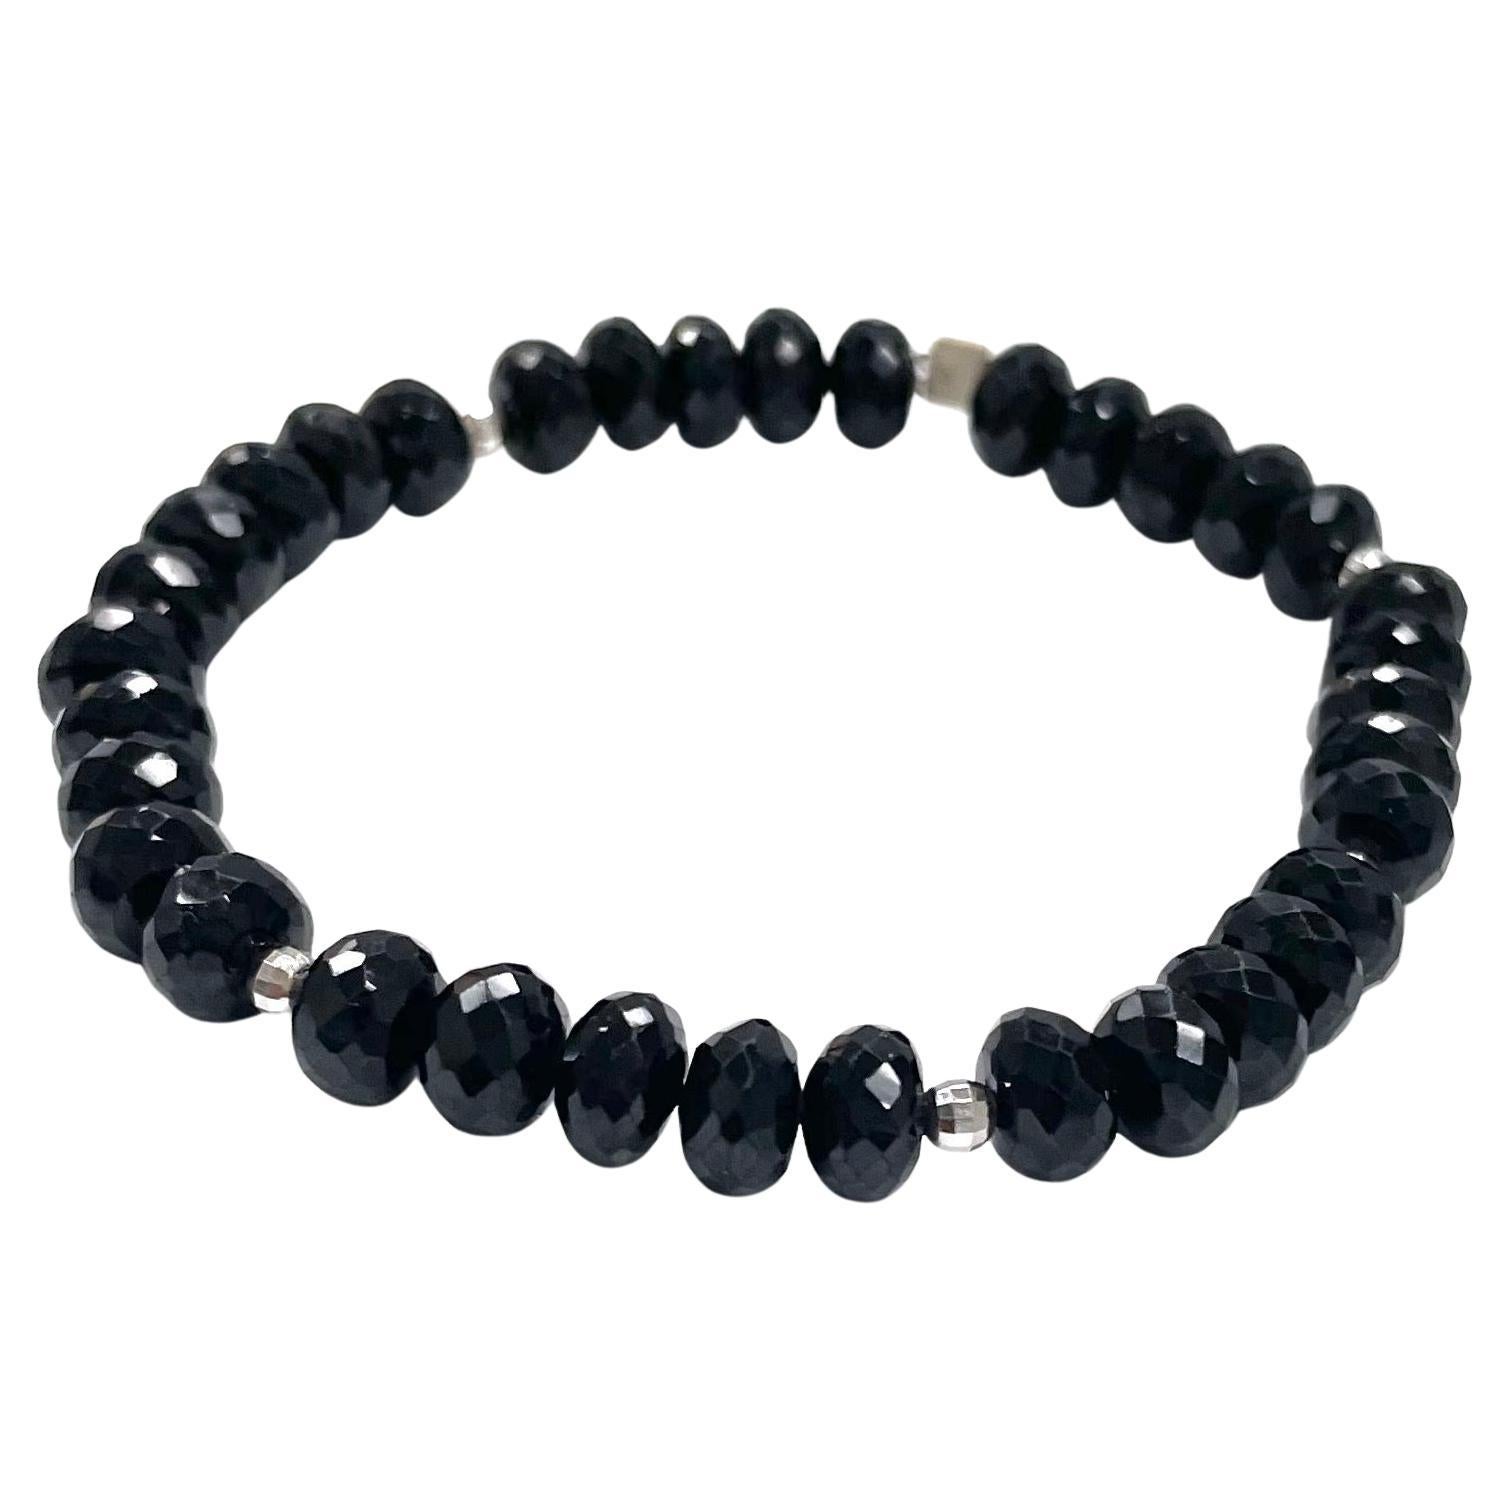 Description
Beautiful, casual or dressy, sparkling black spinel stretchy bracelet accented with 14k white gold faceted balls.
Item # B1321 
Stack it with Item # B1320, sold separately.

Materials and Weight 
Black spinel 81cts.7mm, faceted rondelle